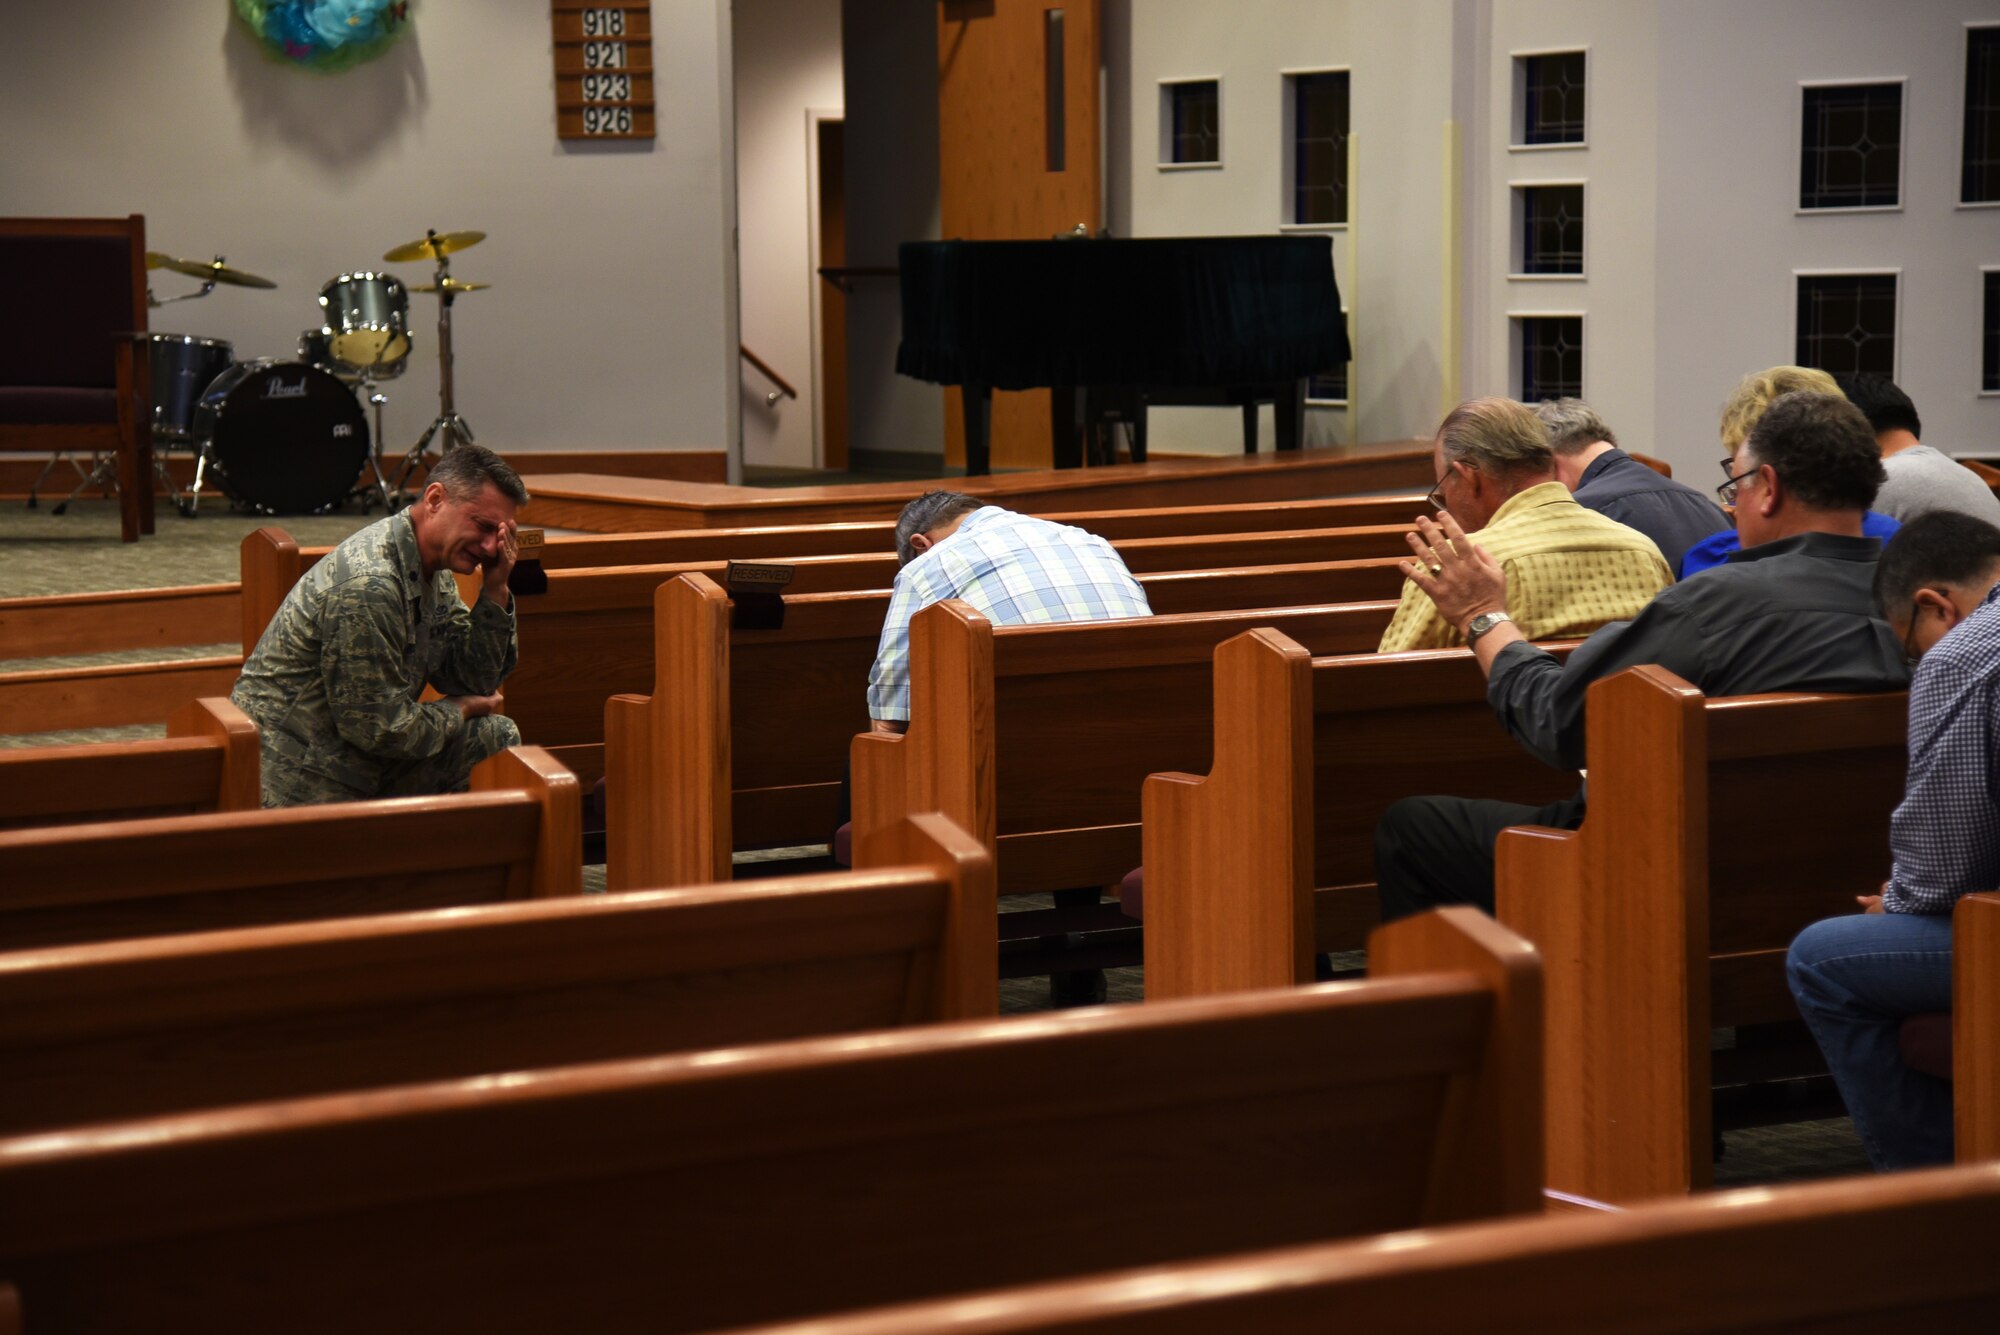 U.S. Air Force Lt. Col. Robert Borger, 17th Training Wing chaplain, kneels for an open prayer session during Clergy Day at the Taylor Chapel on Goodfellow Air Force Base, Texas, May 24, 2018. Borger gathered 25 local pastors to teach them about Goodfellow, its mission and its service members. (U.S. Air Force photo by Staff Sgt. Joshua Edwards/Released)